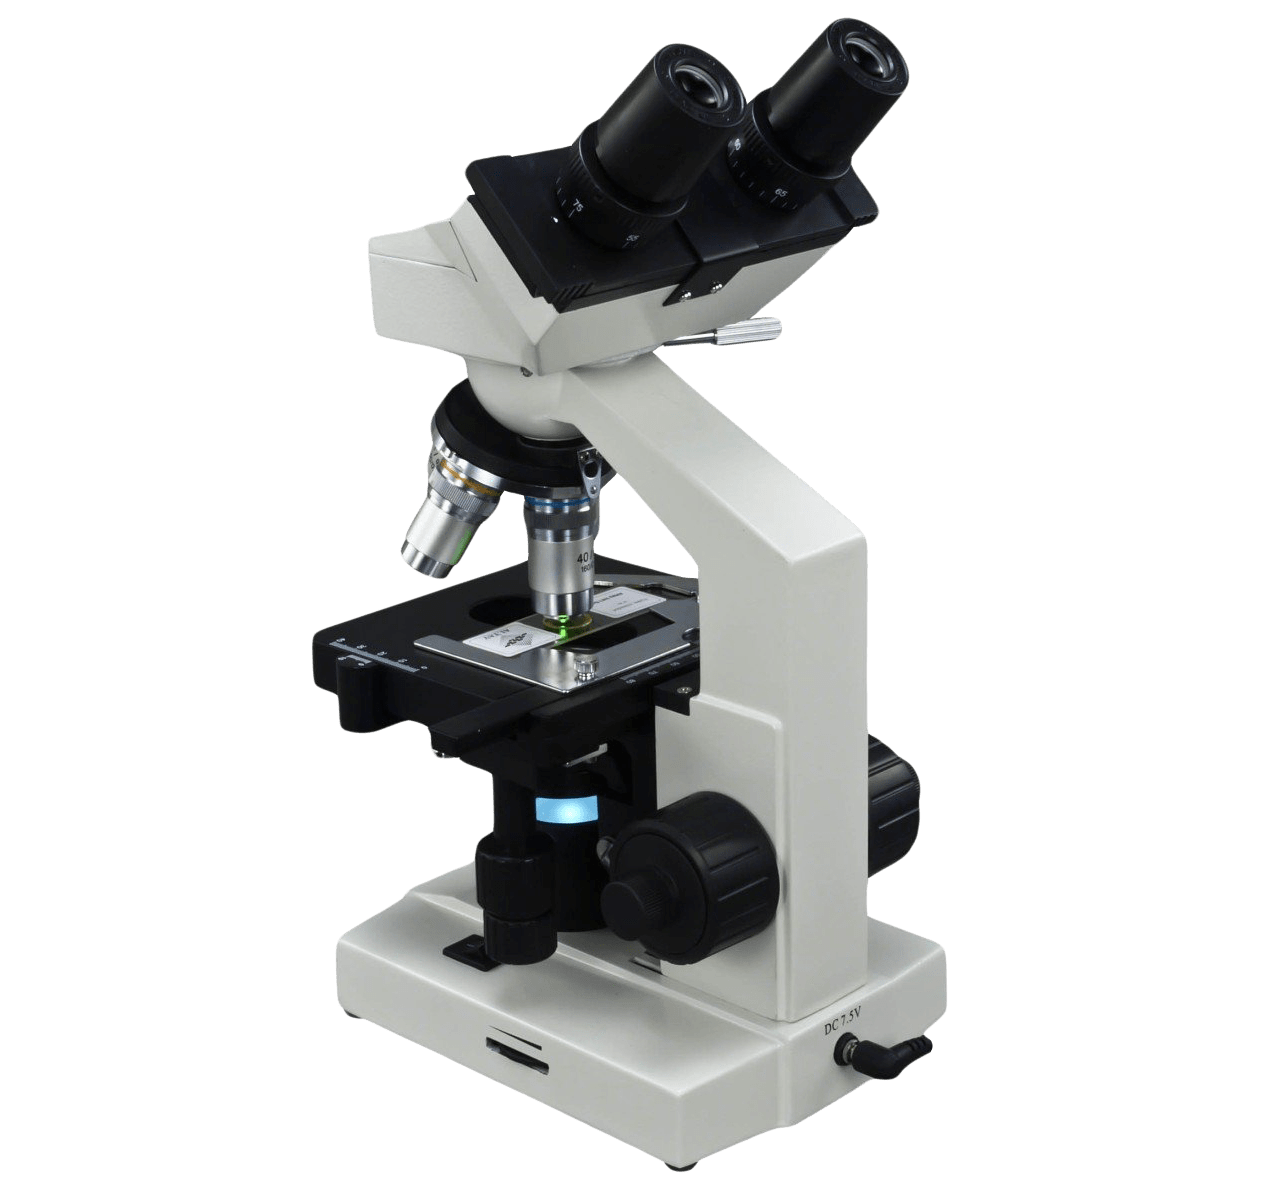 microscope clipart transparent background